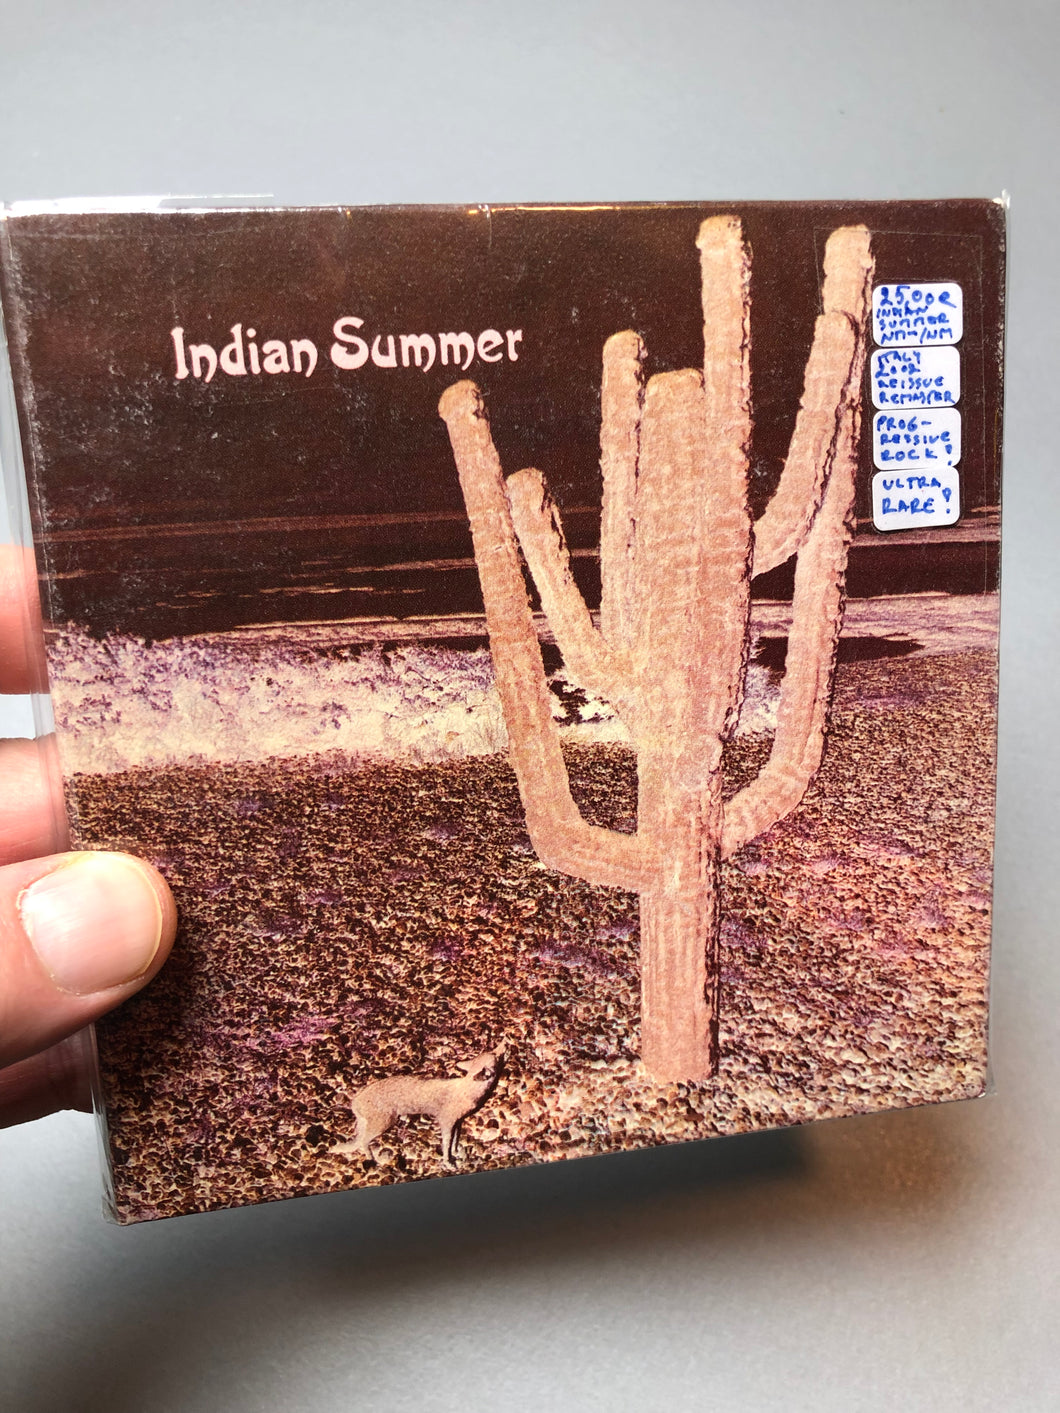 Indian Summer, reissue, remastered, Italy 2002